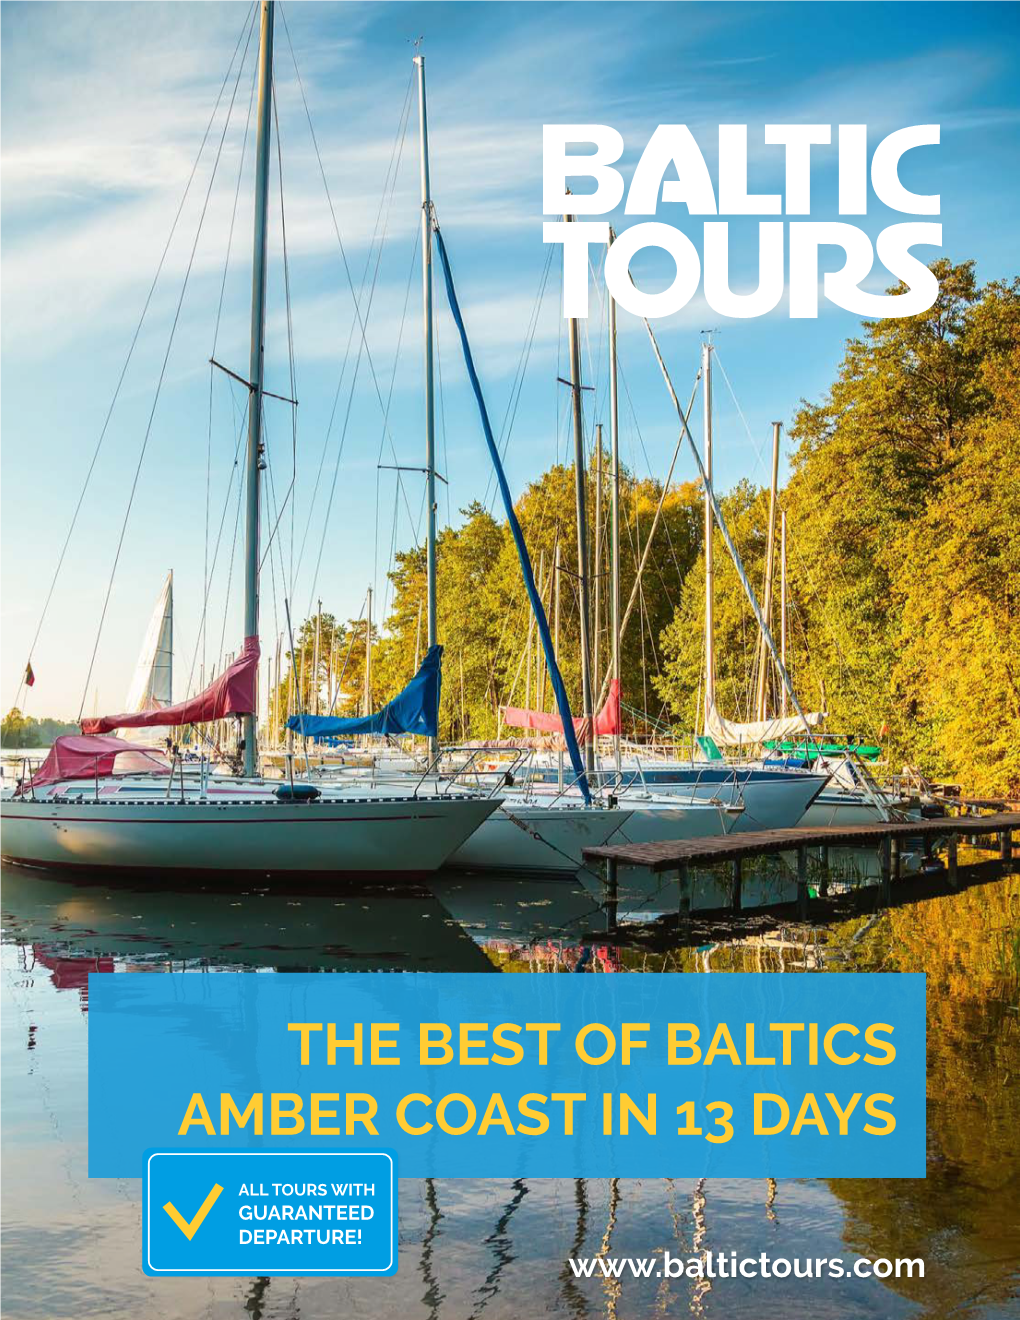 The Best of Baltics Amber Coast in 13 Days